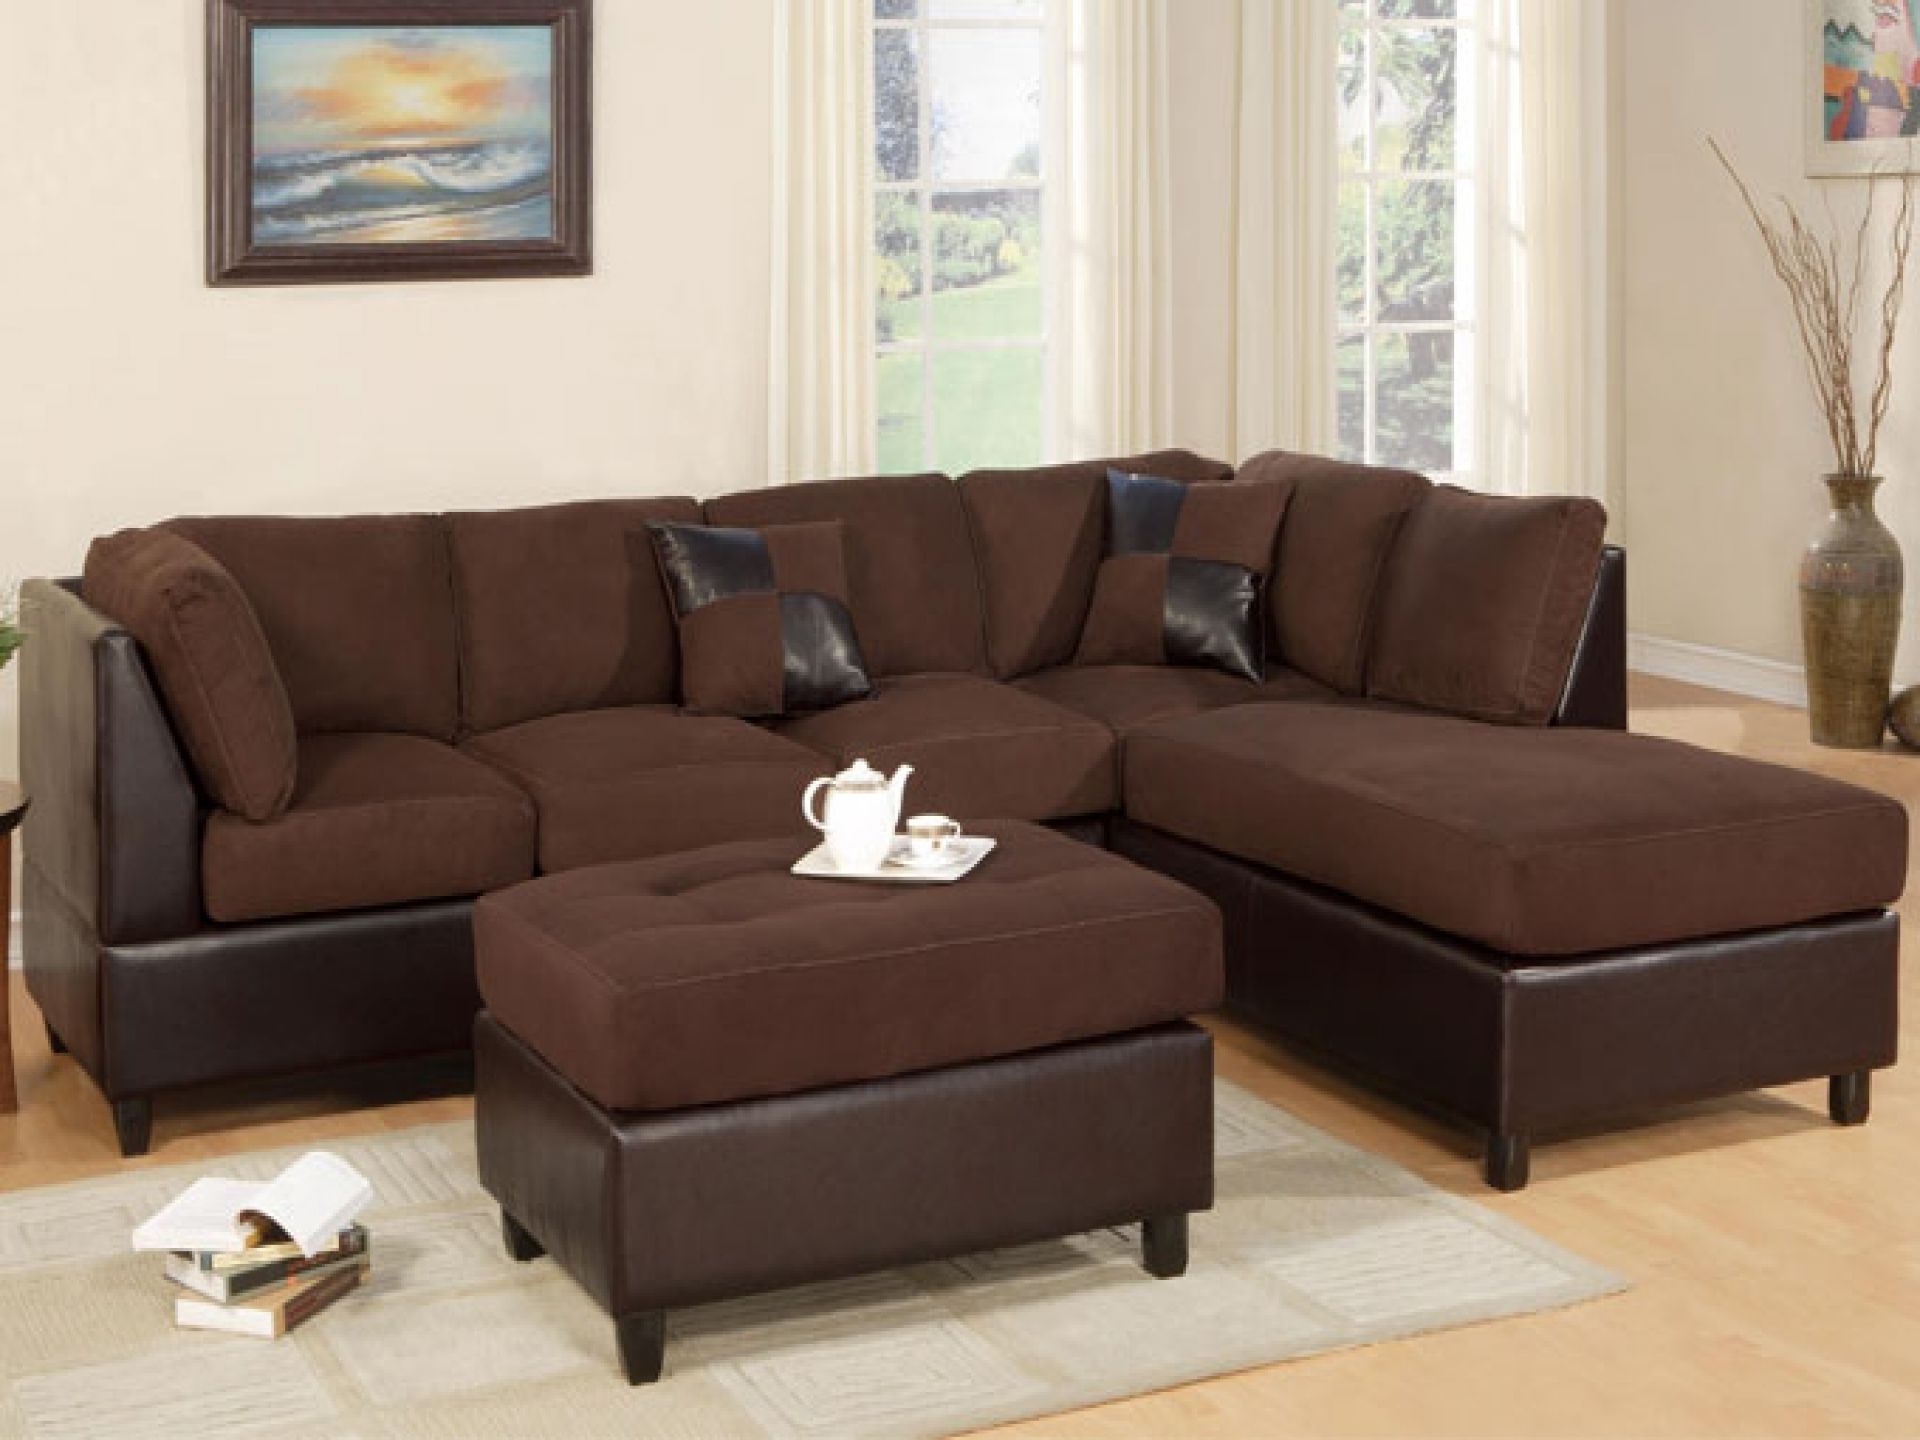 Evansville In Sectional Sofas Inside Current Cheap Living Room Sets Under American Freight Sectionals Sectional (View 4 of 20)